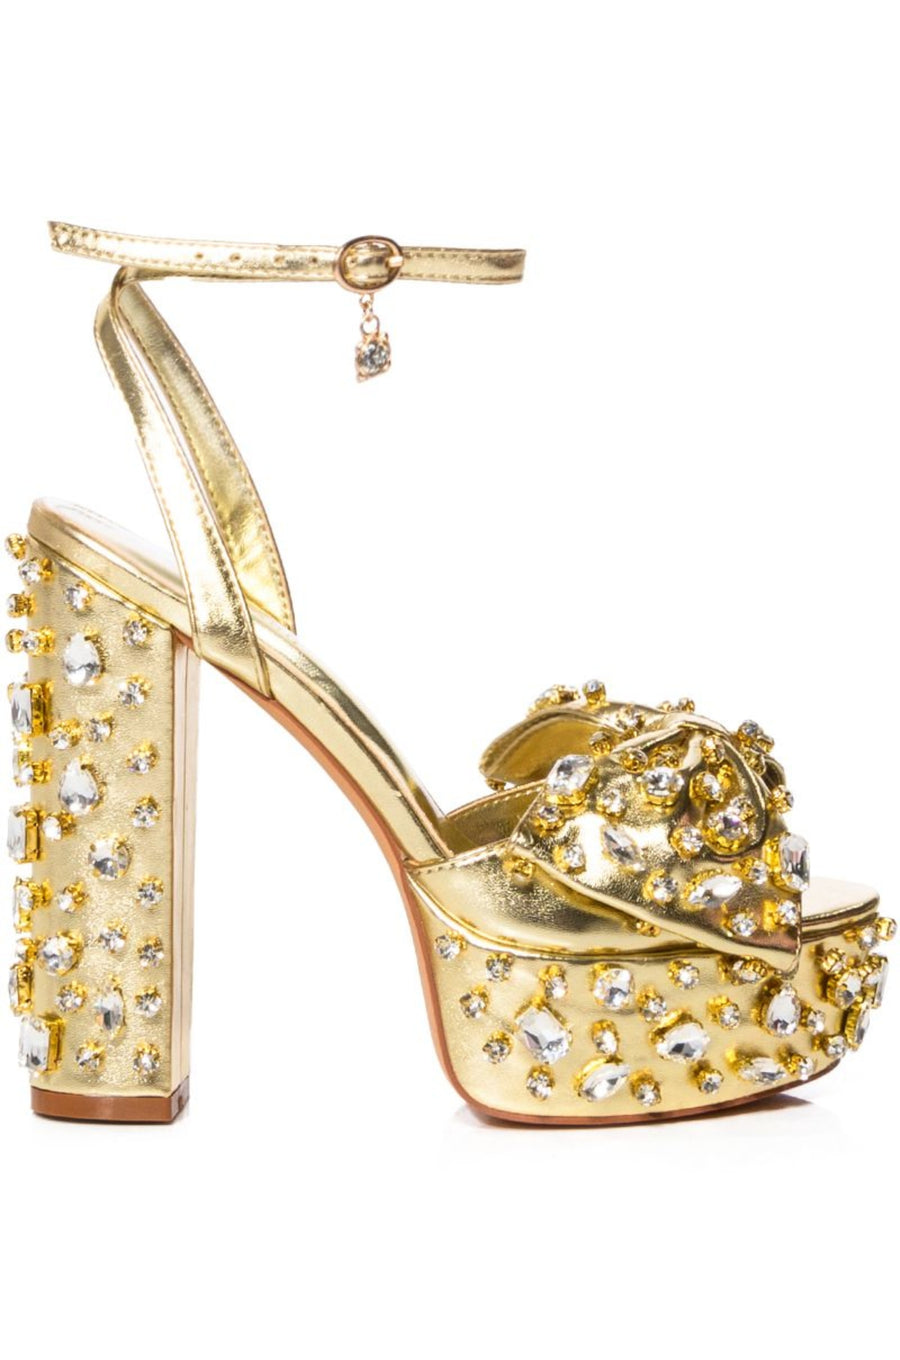 chunky gold platform heels with an open toe and gold bow detail with rhinestone embellishment